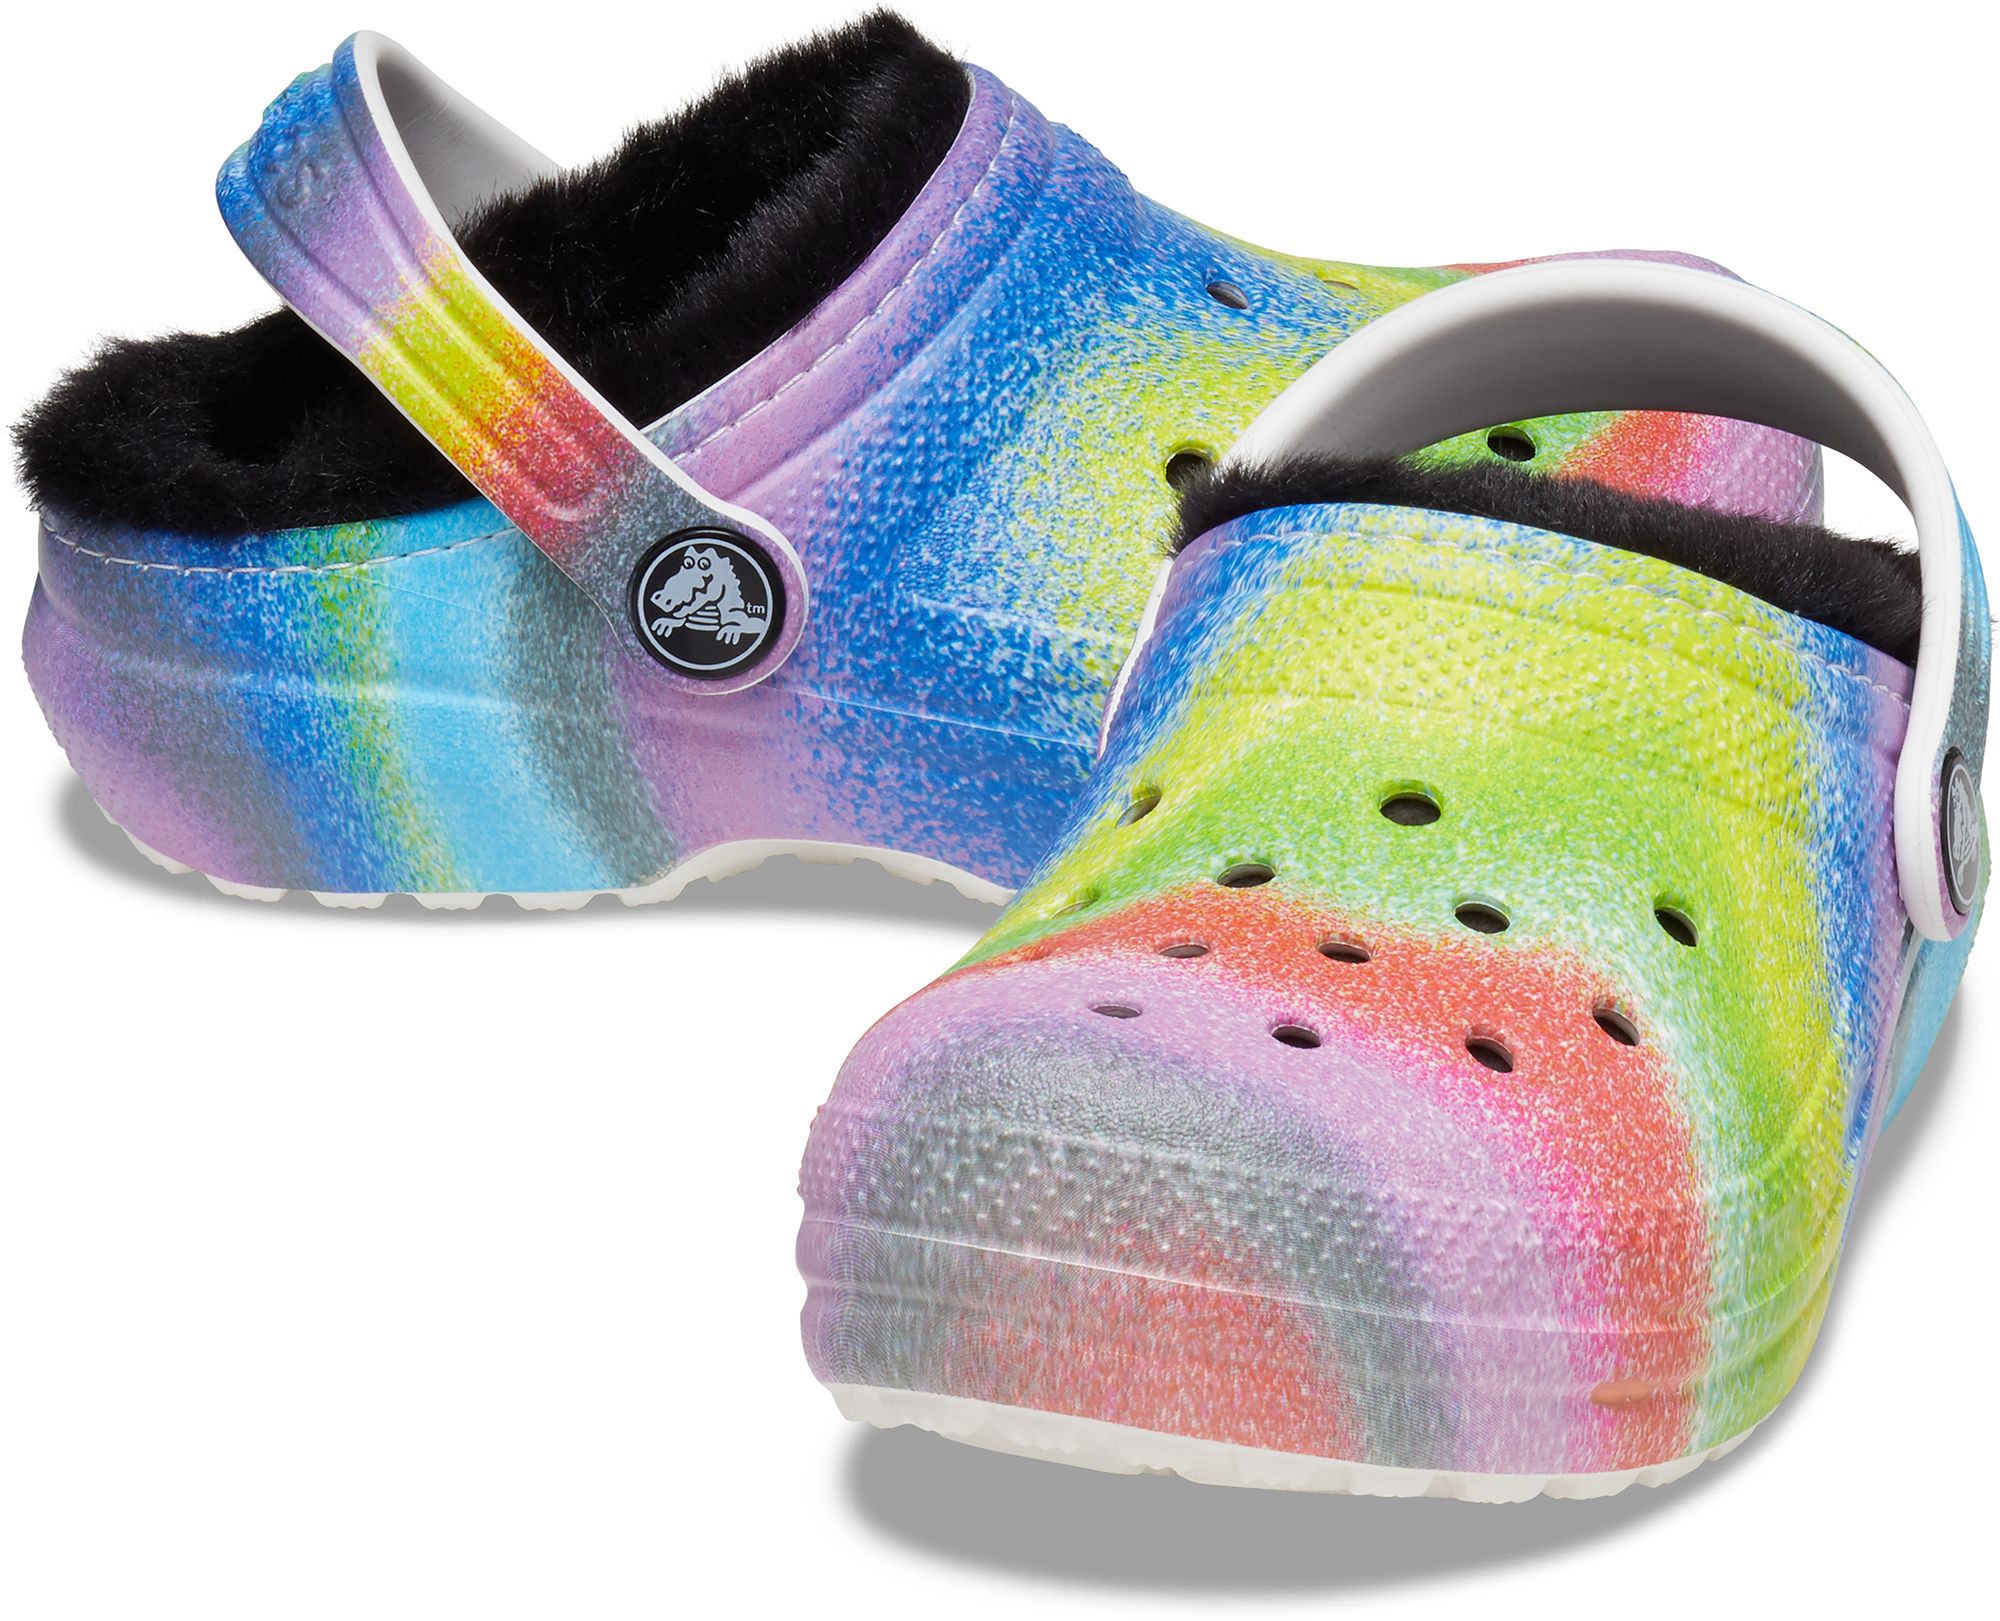 Crocs Toddler Classic Lined Clogs